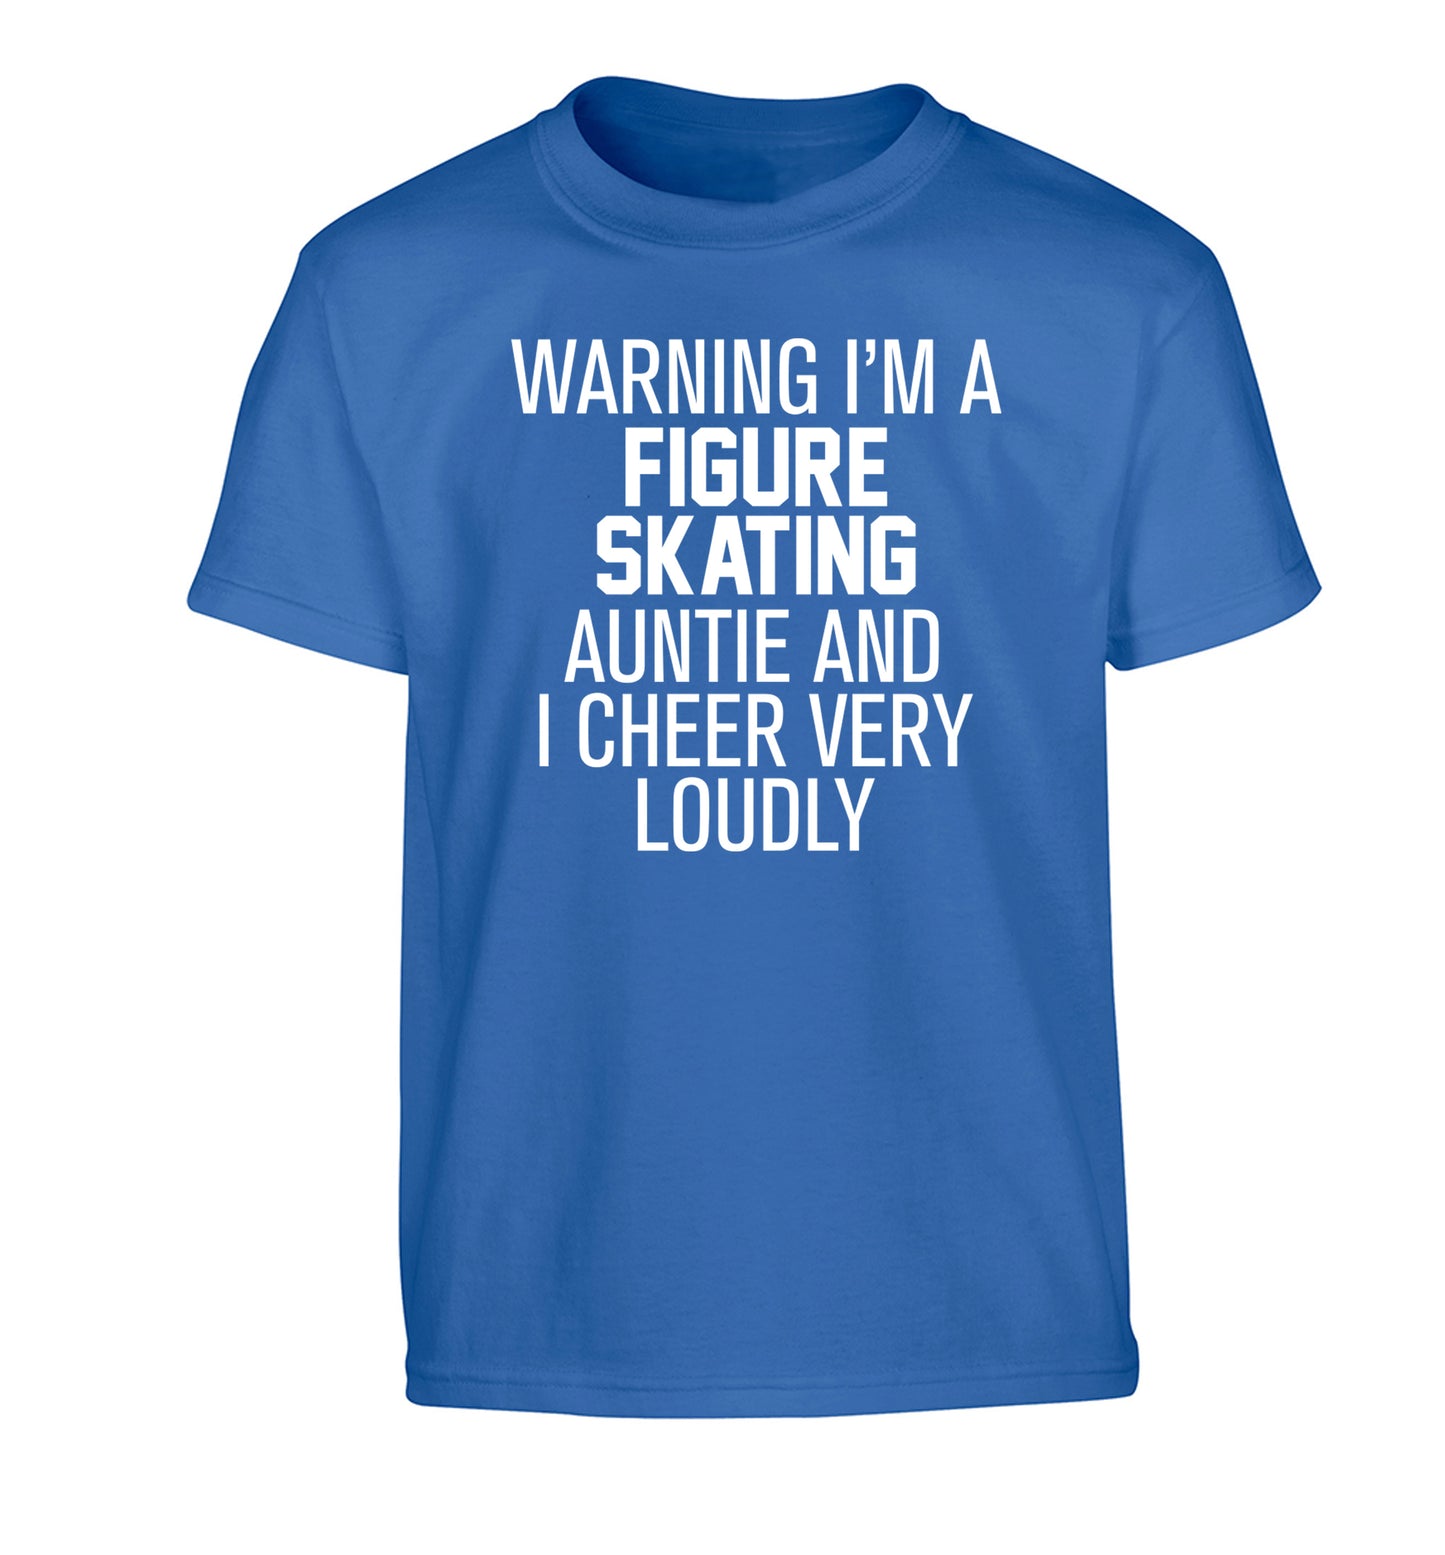 Warning I'm a figure skating auntie and I cheer very loudly Children's blue Tshirt 12-14 Years